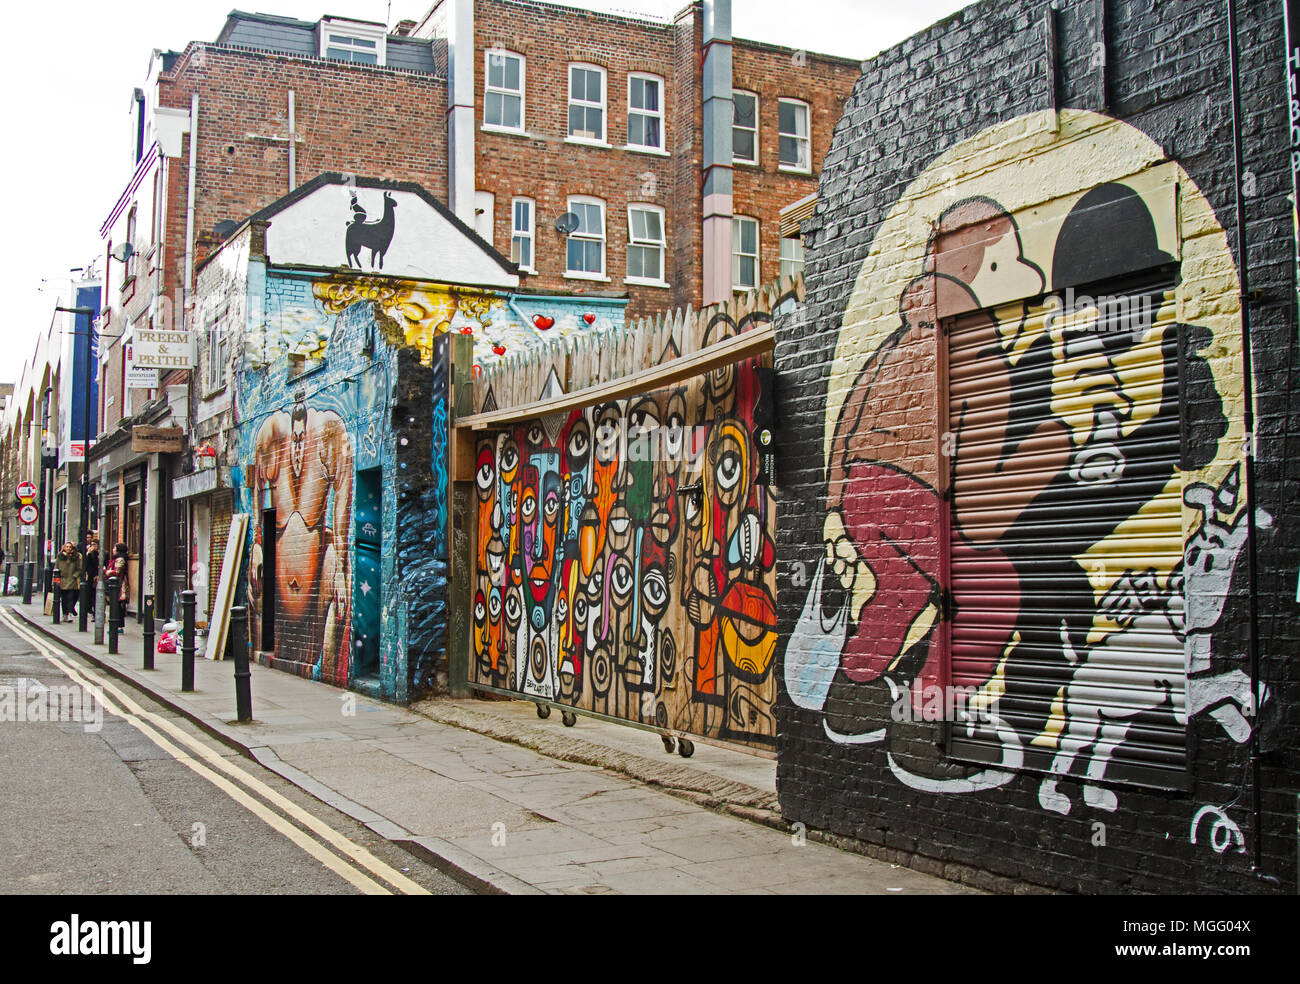 London Street art, giving colour and art to the streets of London's hidden corners. Stock Photo